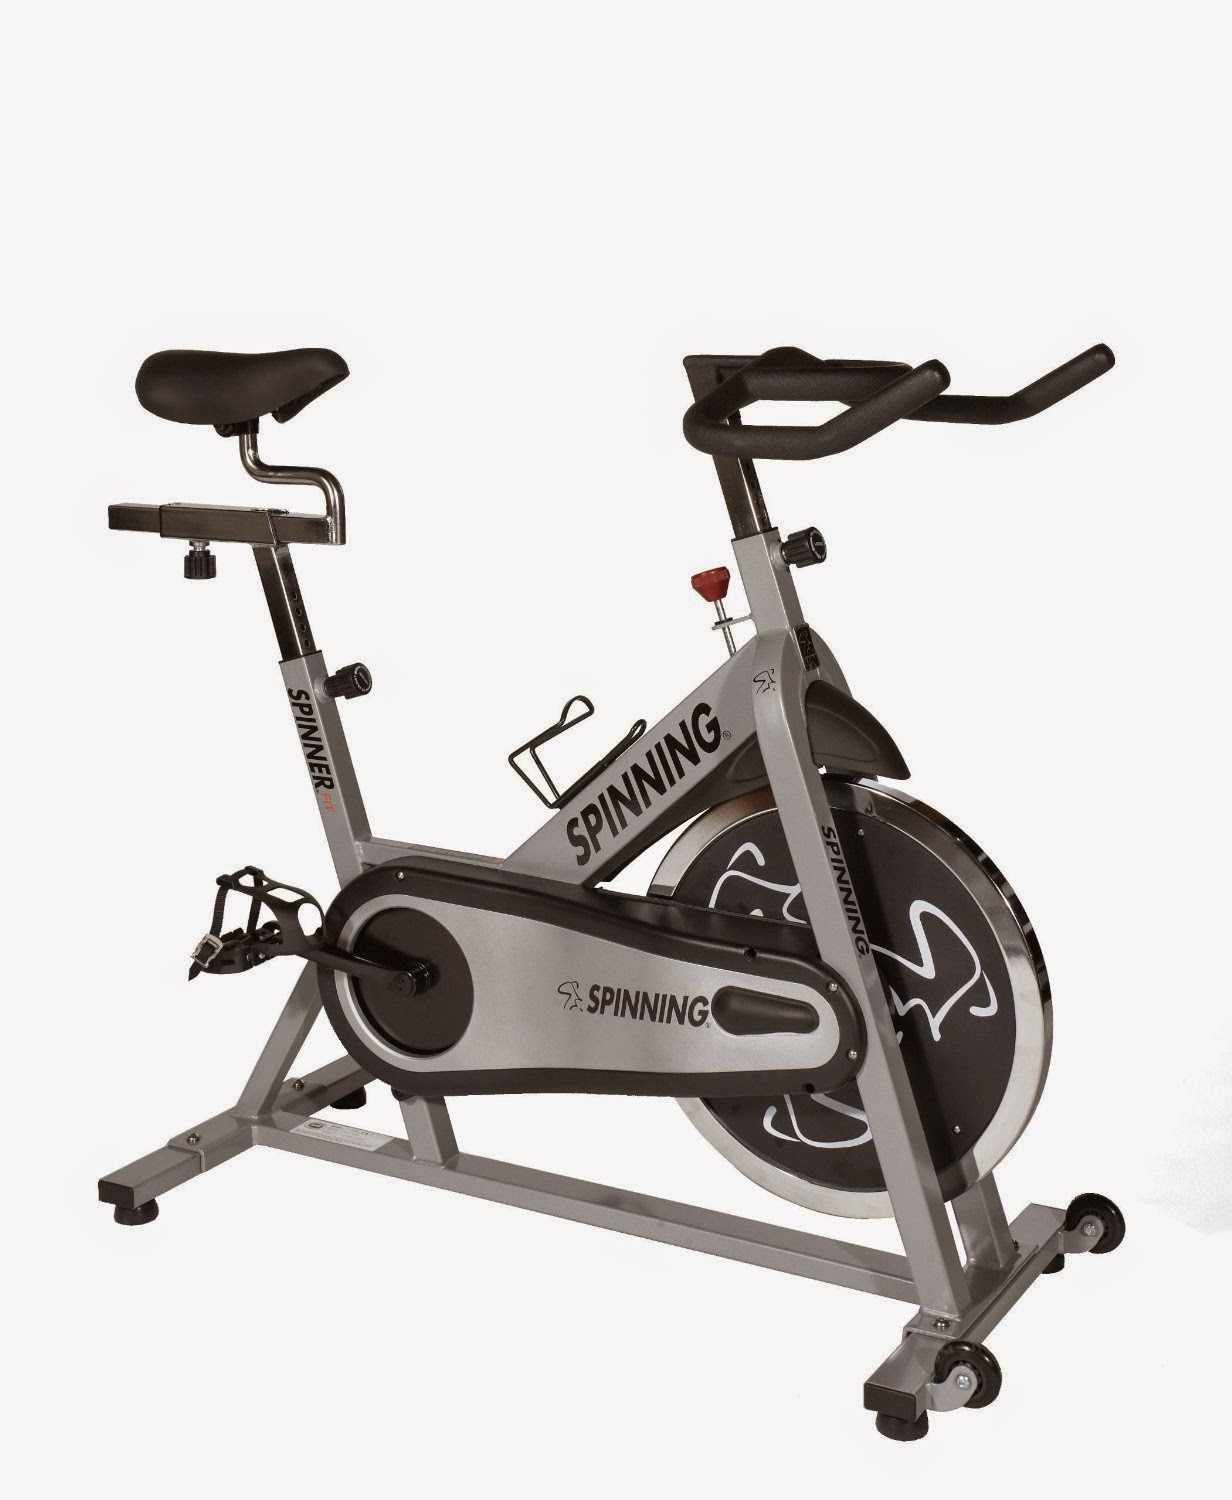 Spinner Fit Indoor Cycle Spin Bike, review features, 31 lb flywheel, perimeter weighted flywheel, wide padded adjustable saddle, patented handlebars with loop design and 5 degree angle, adjustable dial resistance knob, 4 spinning DVDs